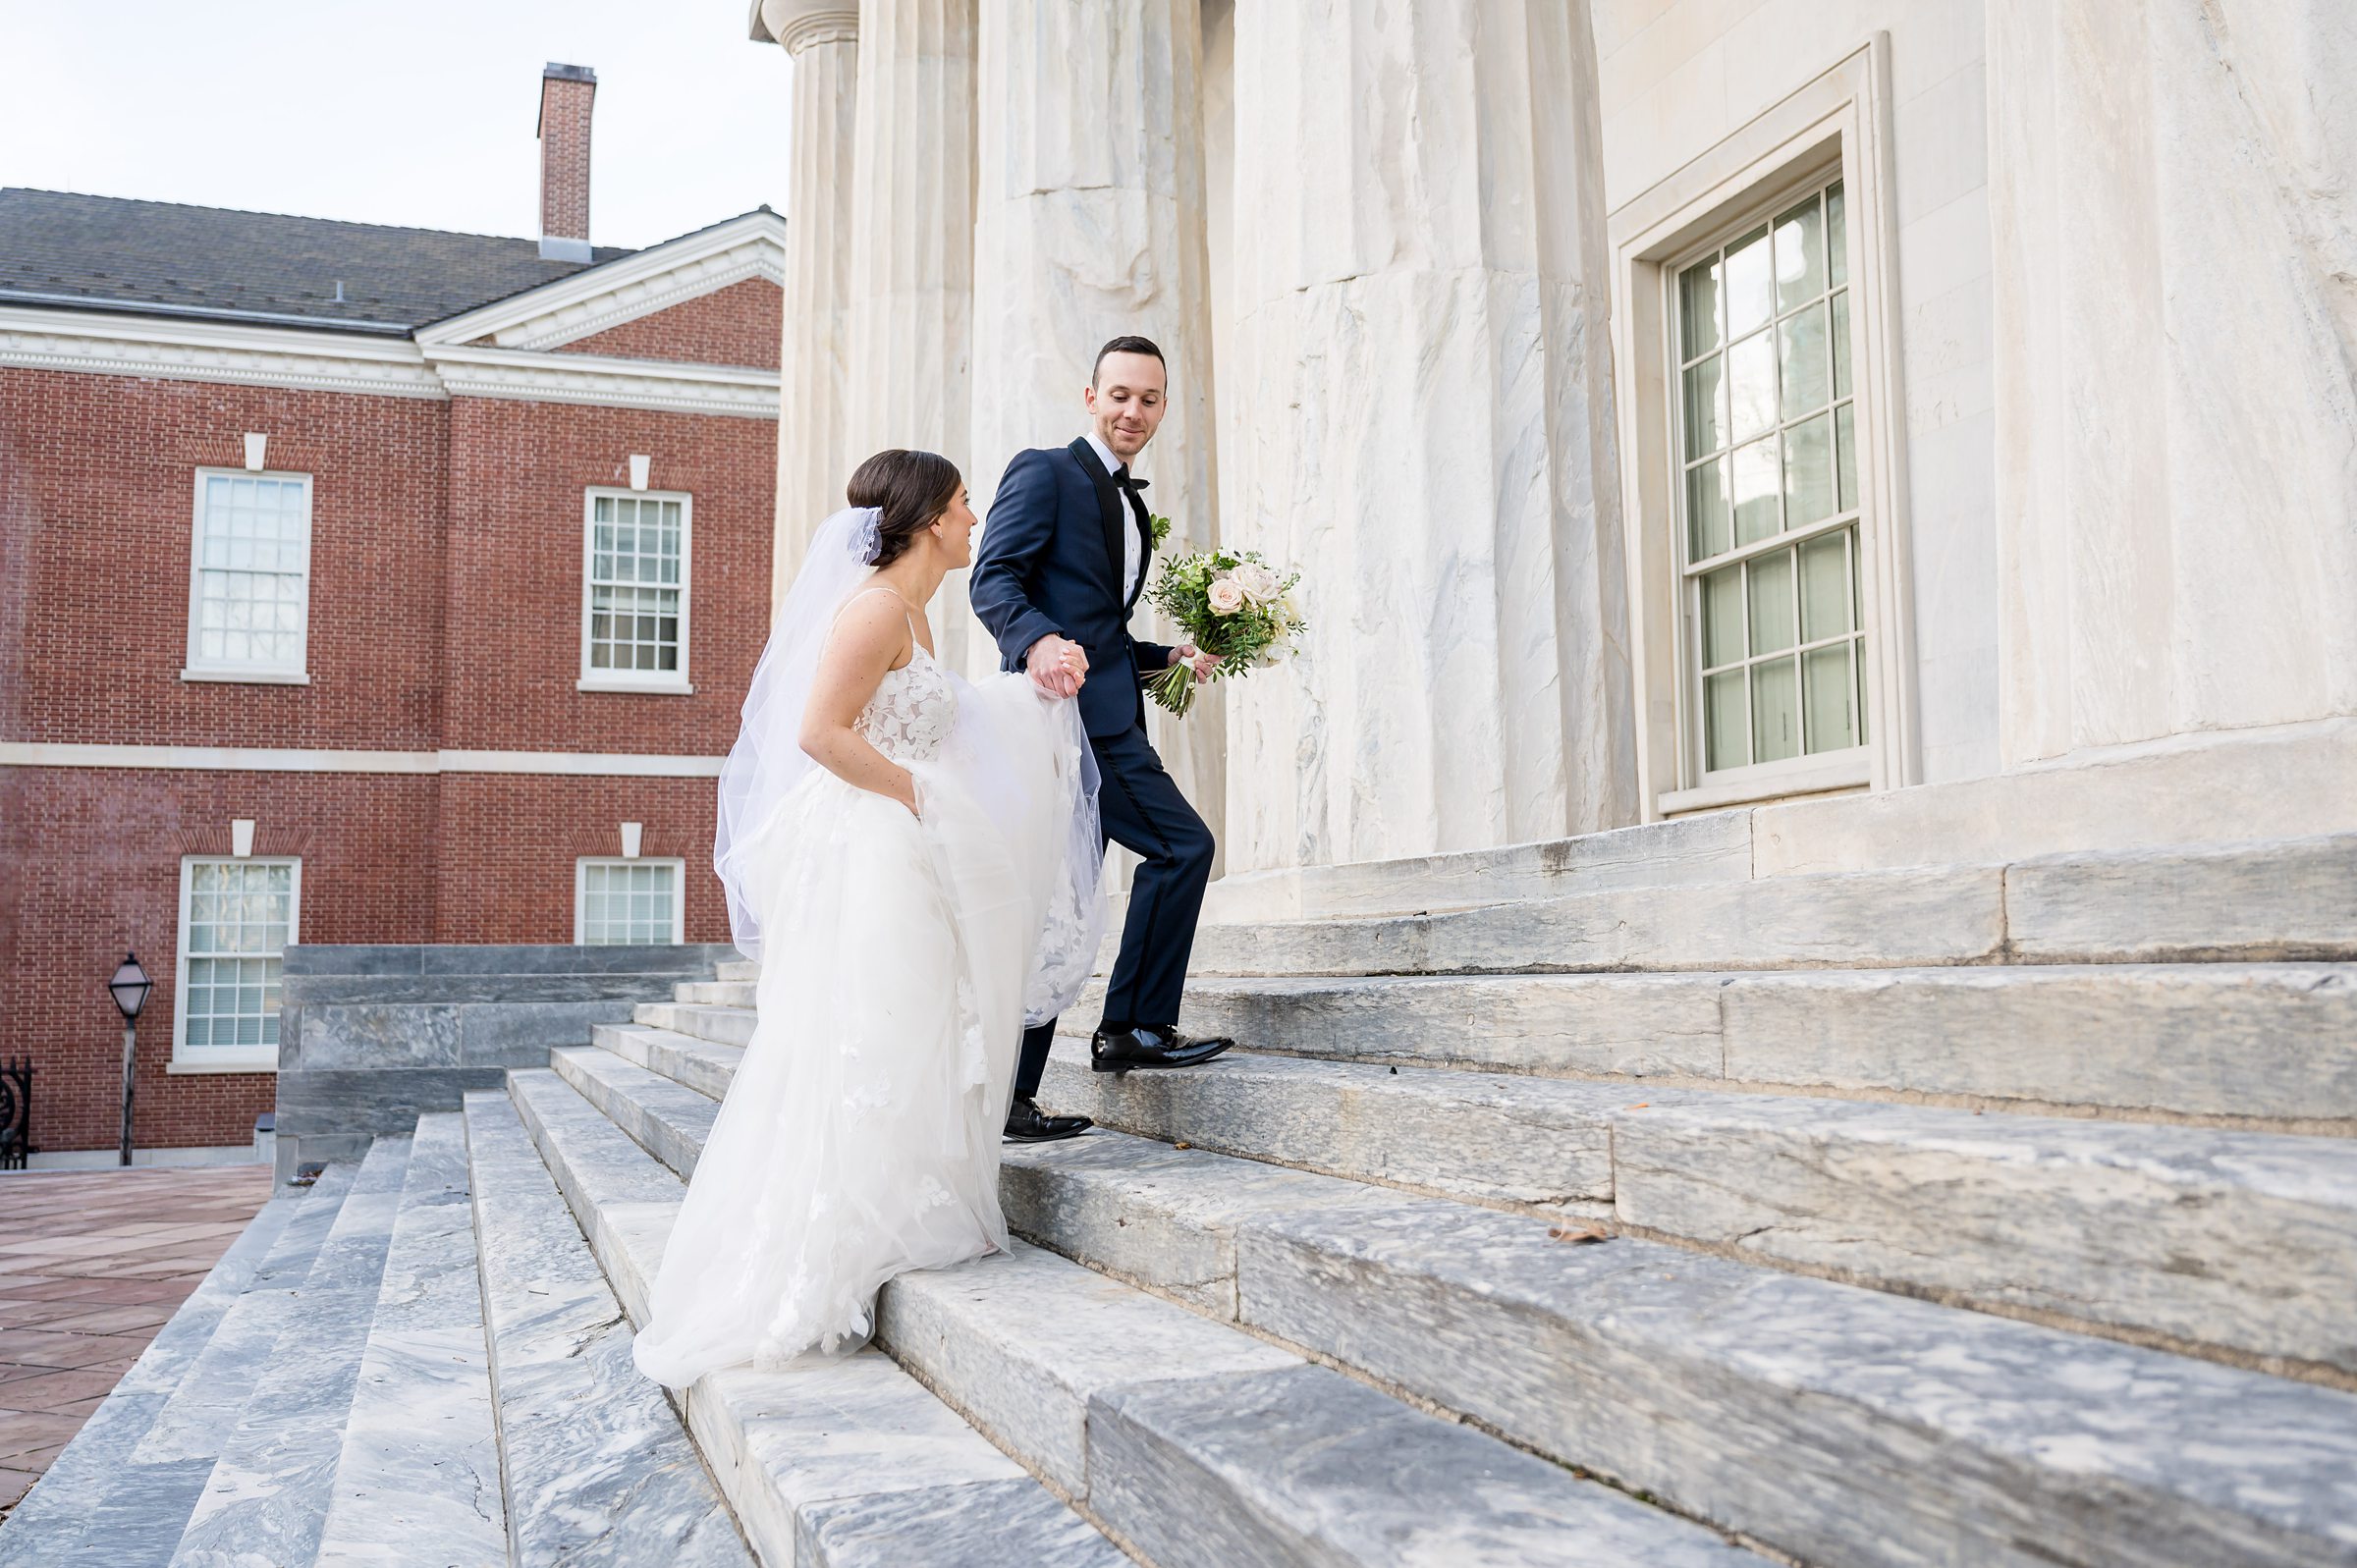 A bride and groom elegantly descending the steps of a building after their Lilah Events wedding.